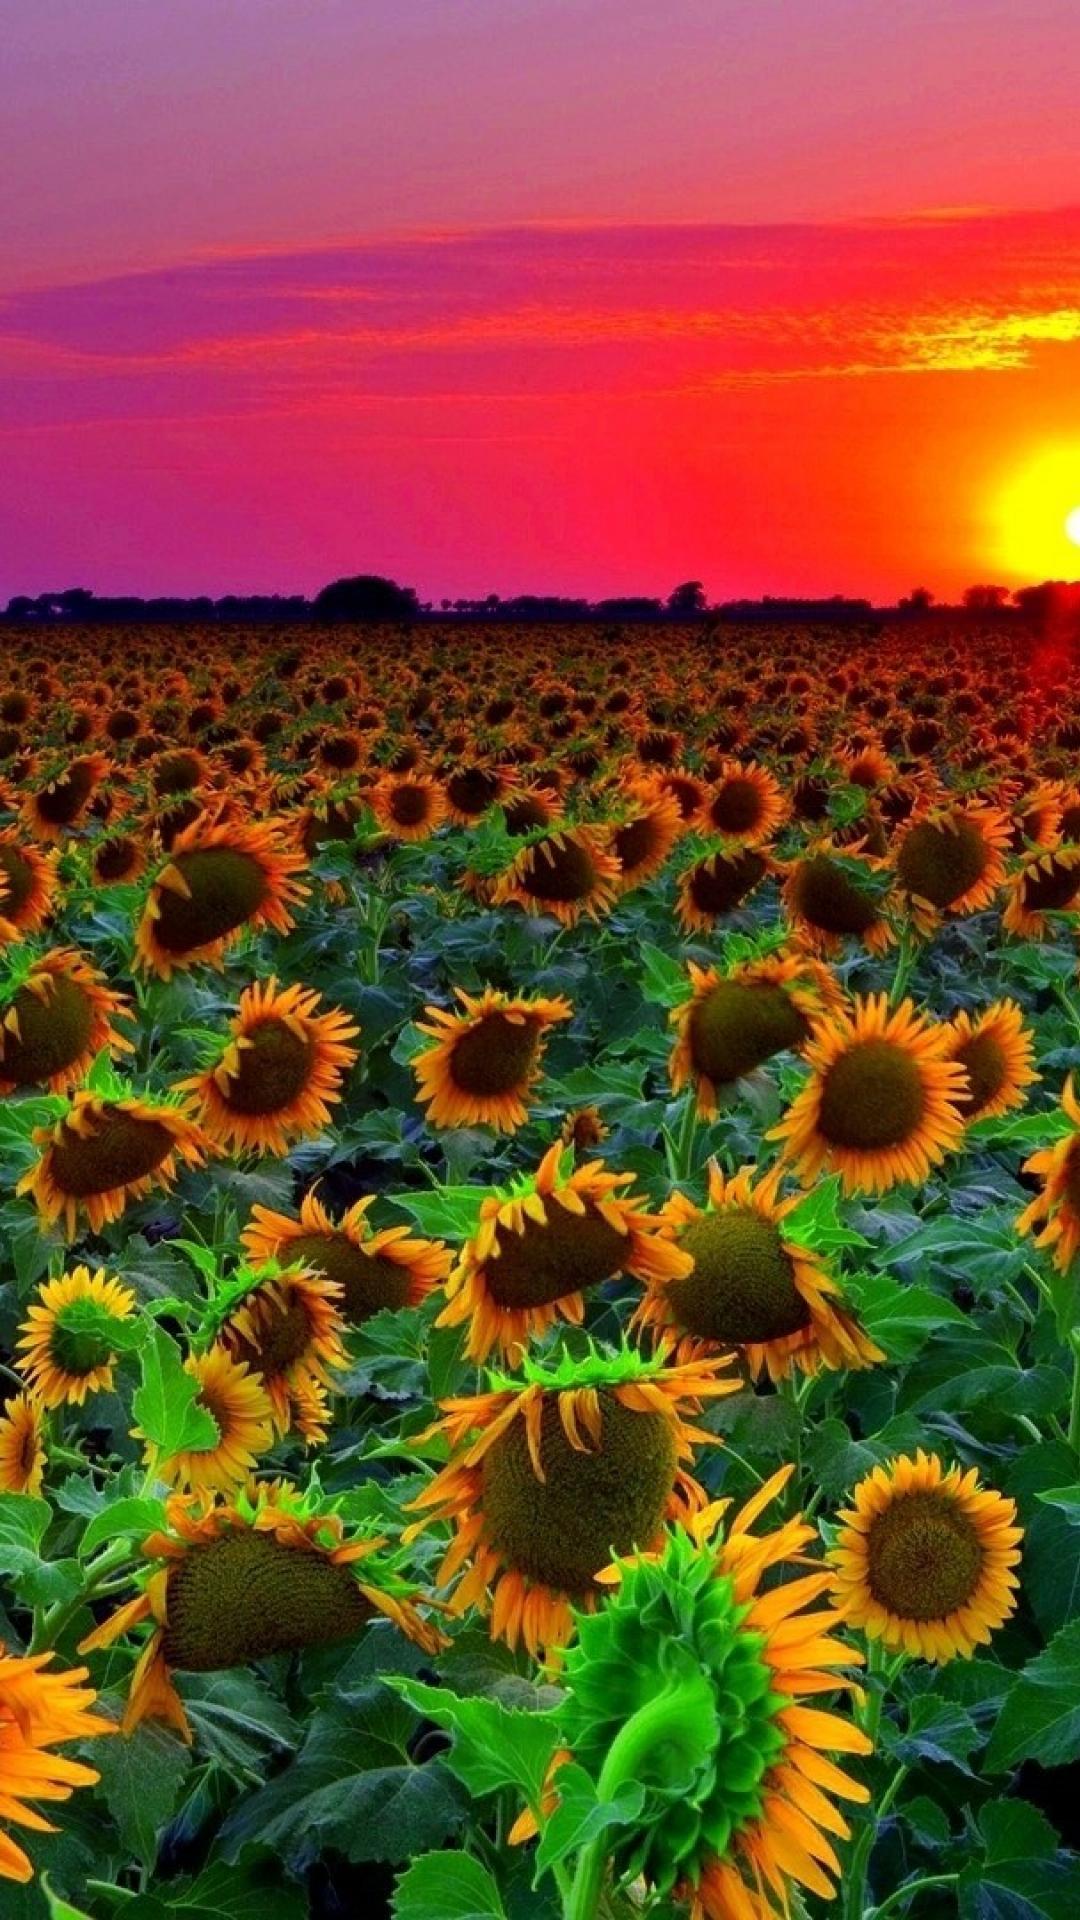 Sunflowers At Sunset Wallpapers - Wallpaper Cave